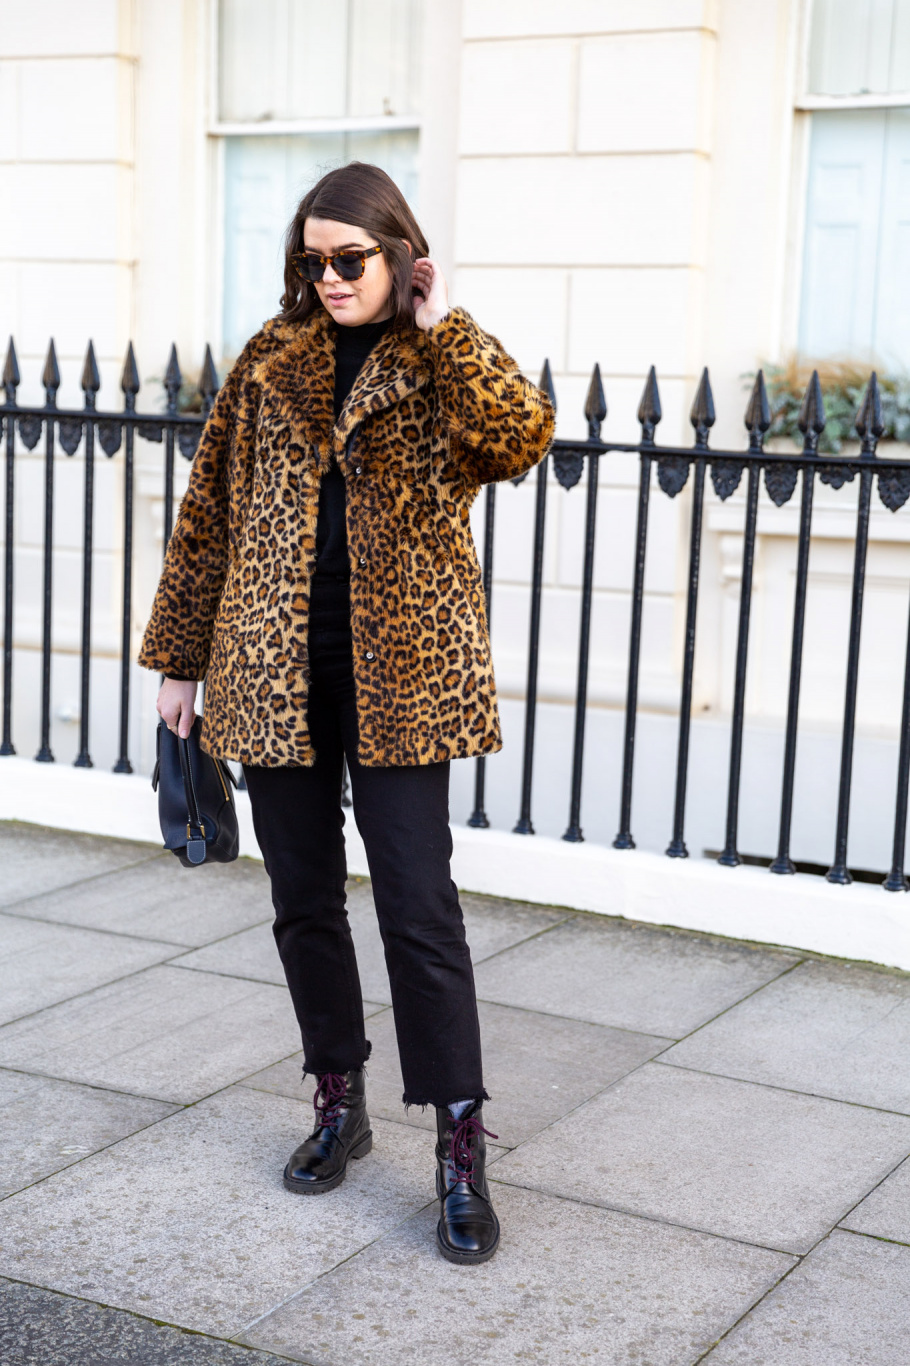 How I’m Organising My Capsule Wardrobe for 2020 – The Anna Edit